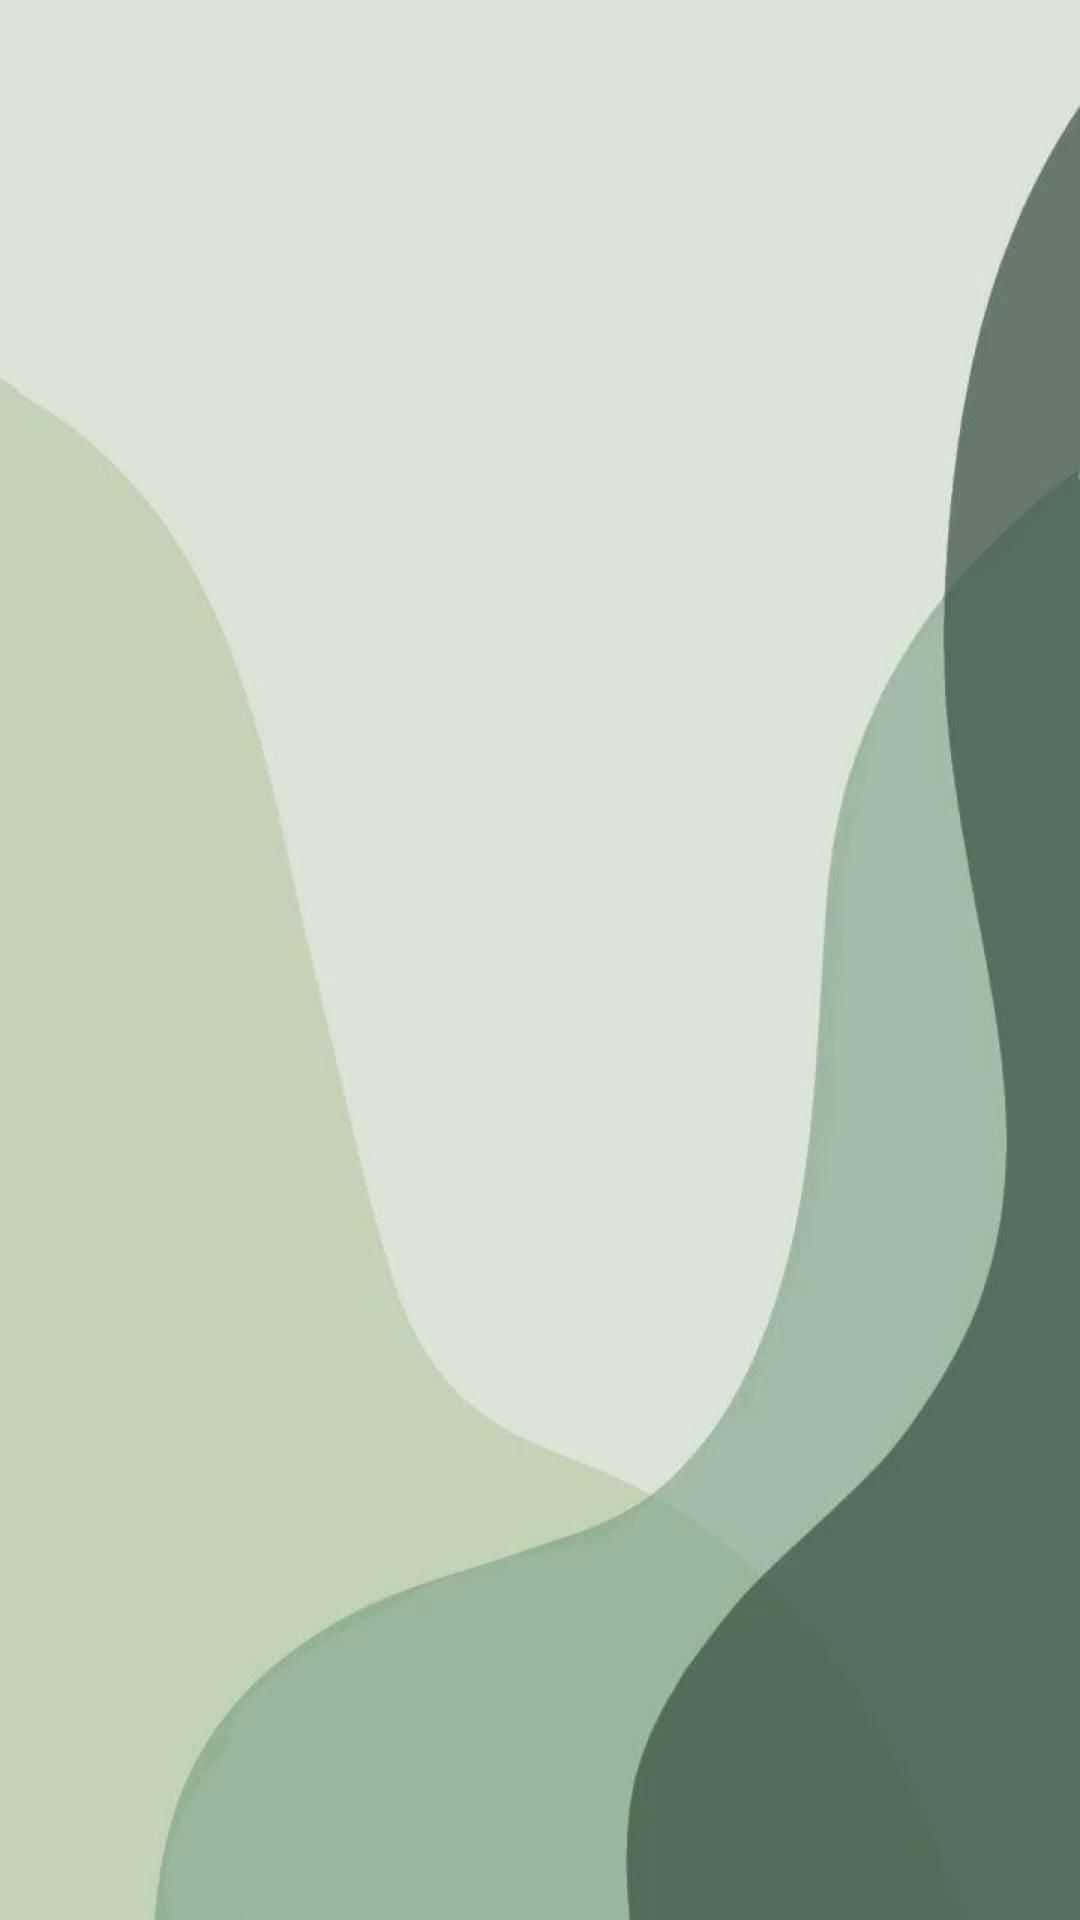 Cute Sage Green See Through Curving Slope Shapes Background